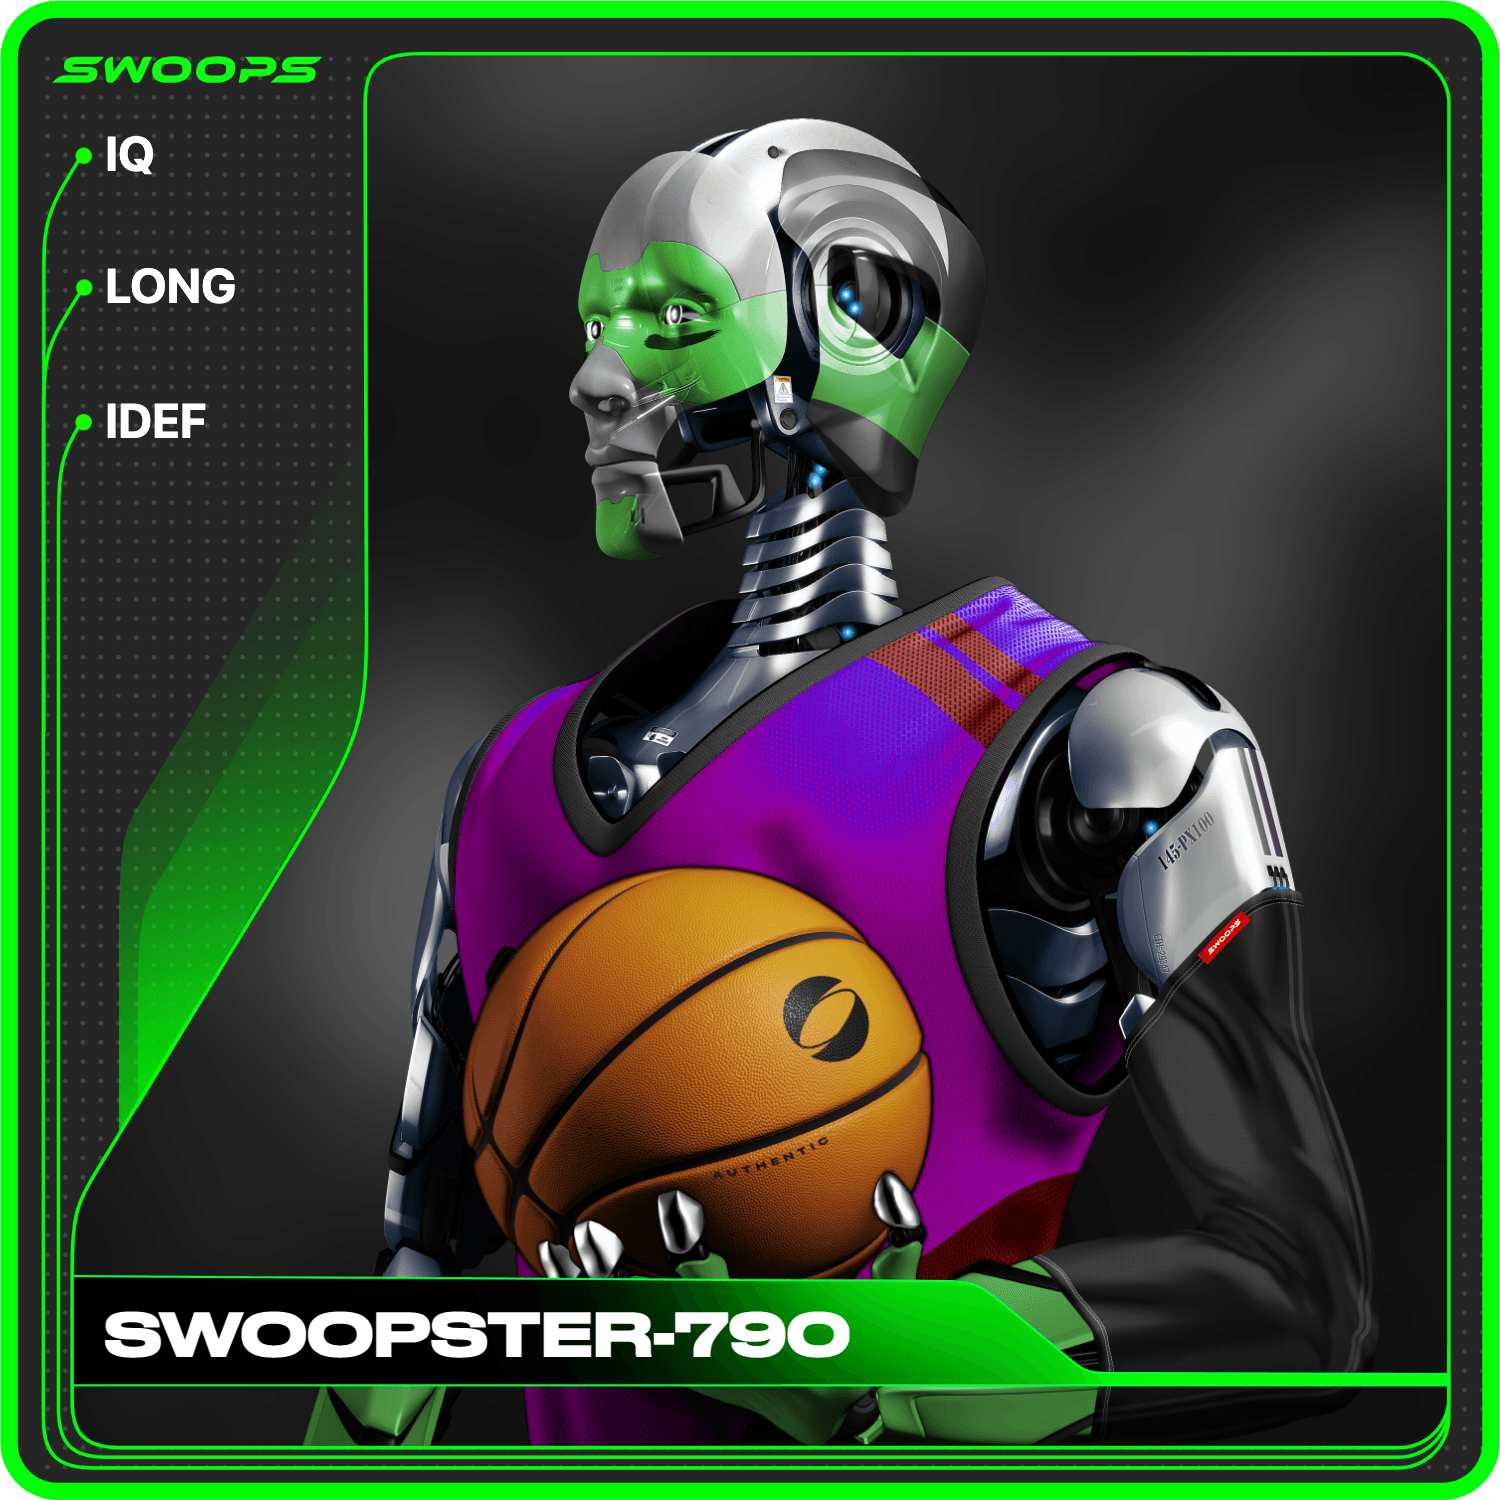 SWOOPSTER-790